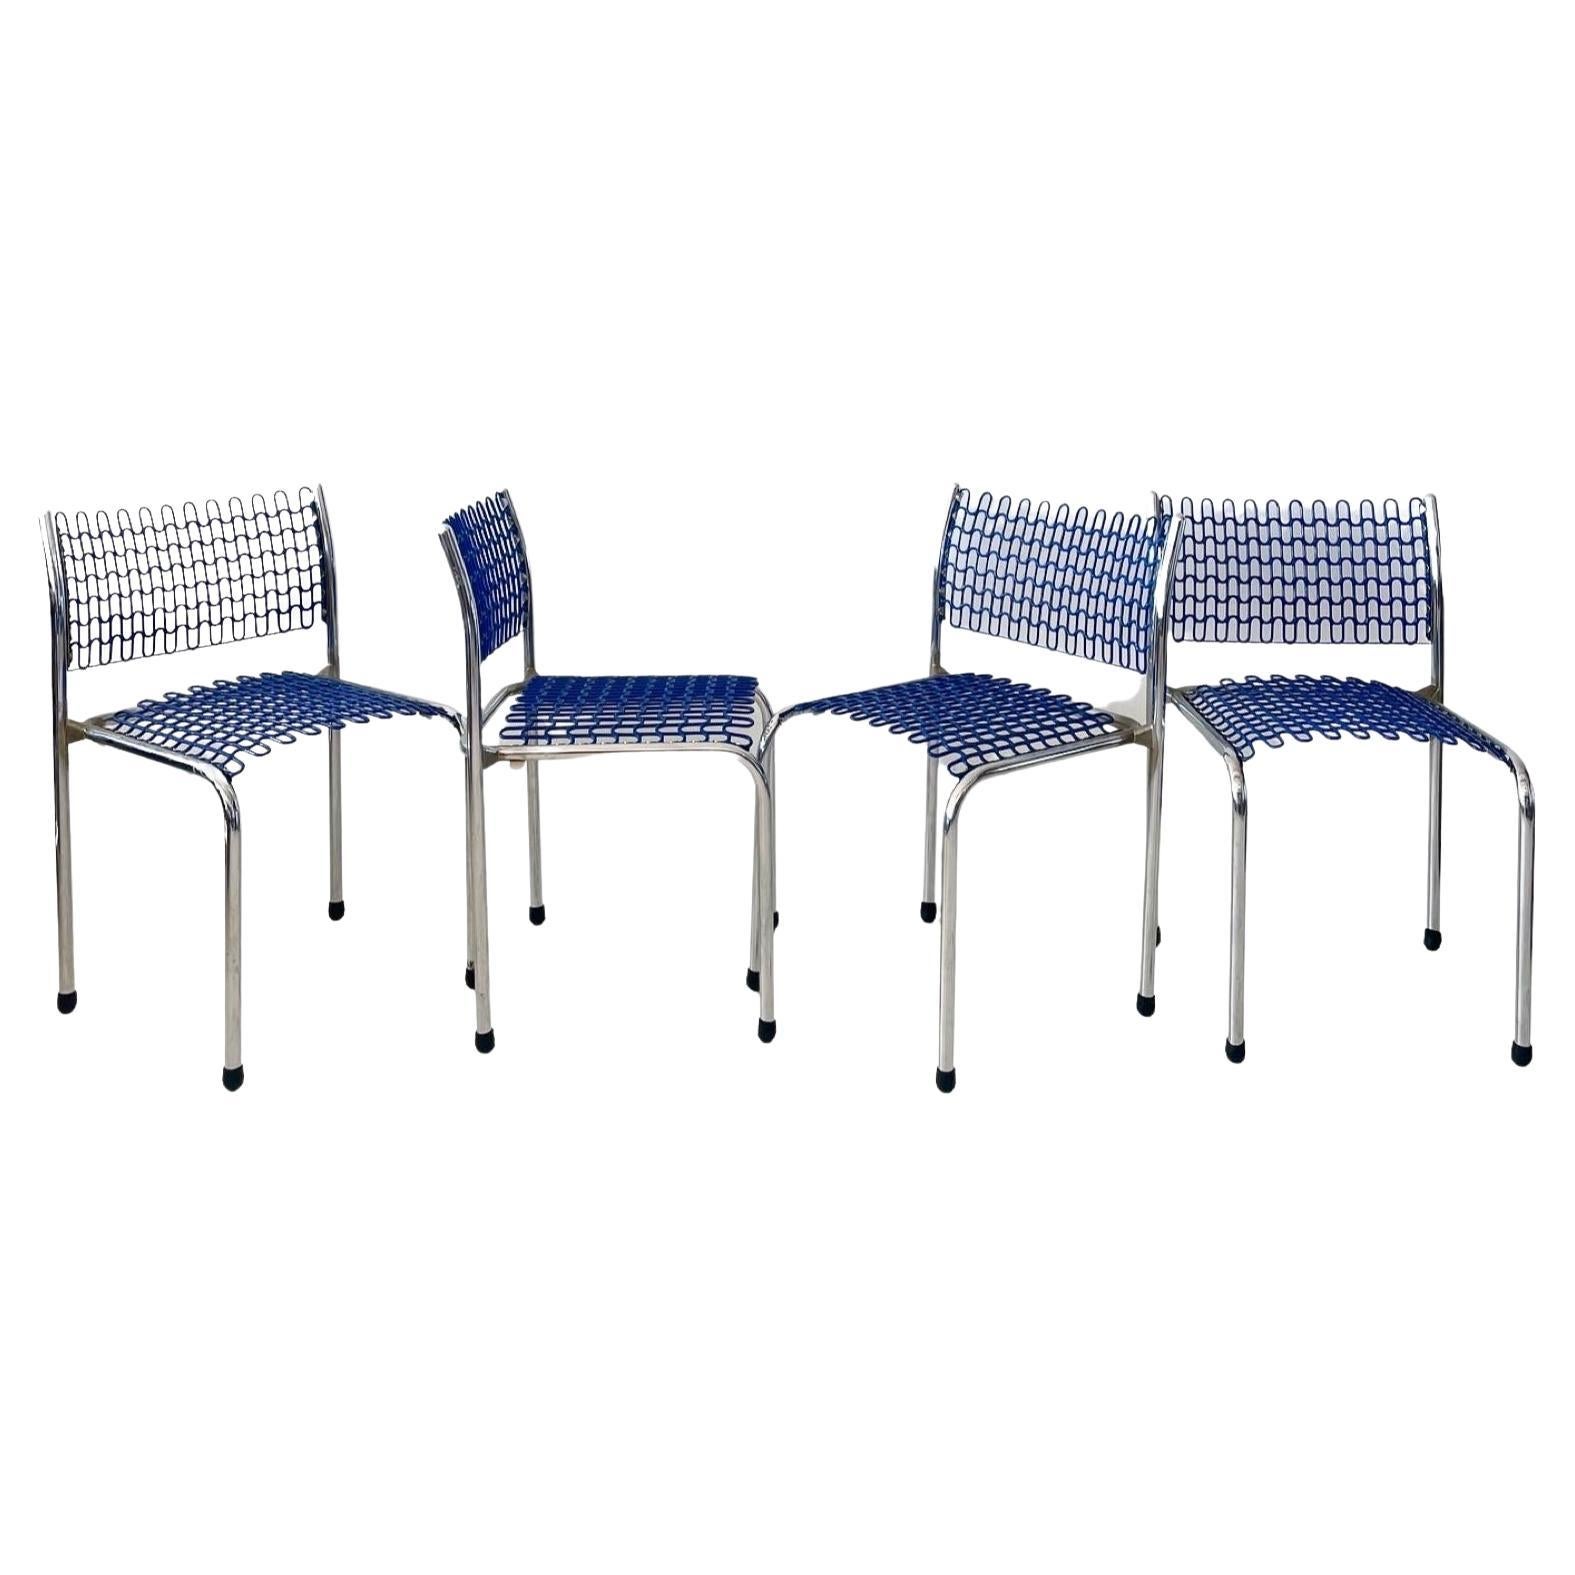 Blue Sof Tech Chairs by David Rowland for Thonet (set of 4)